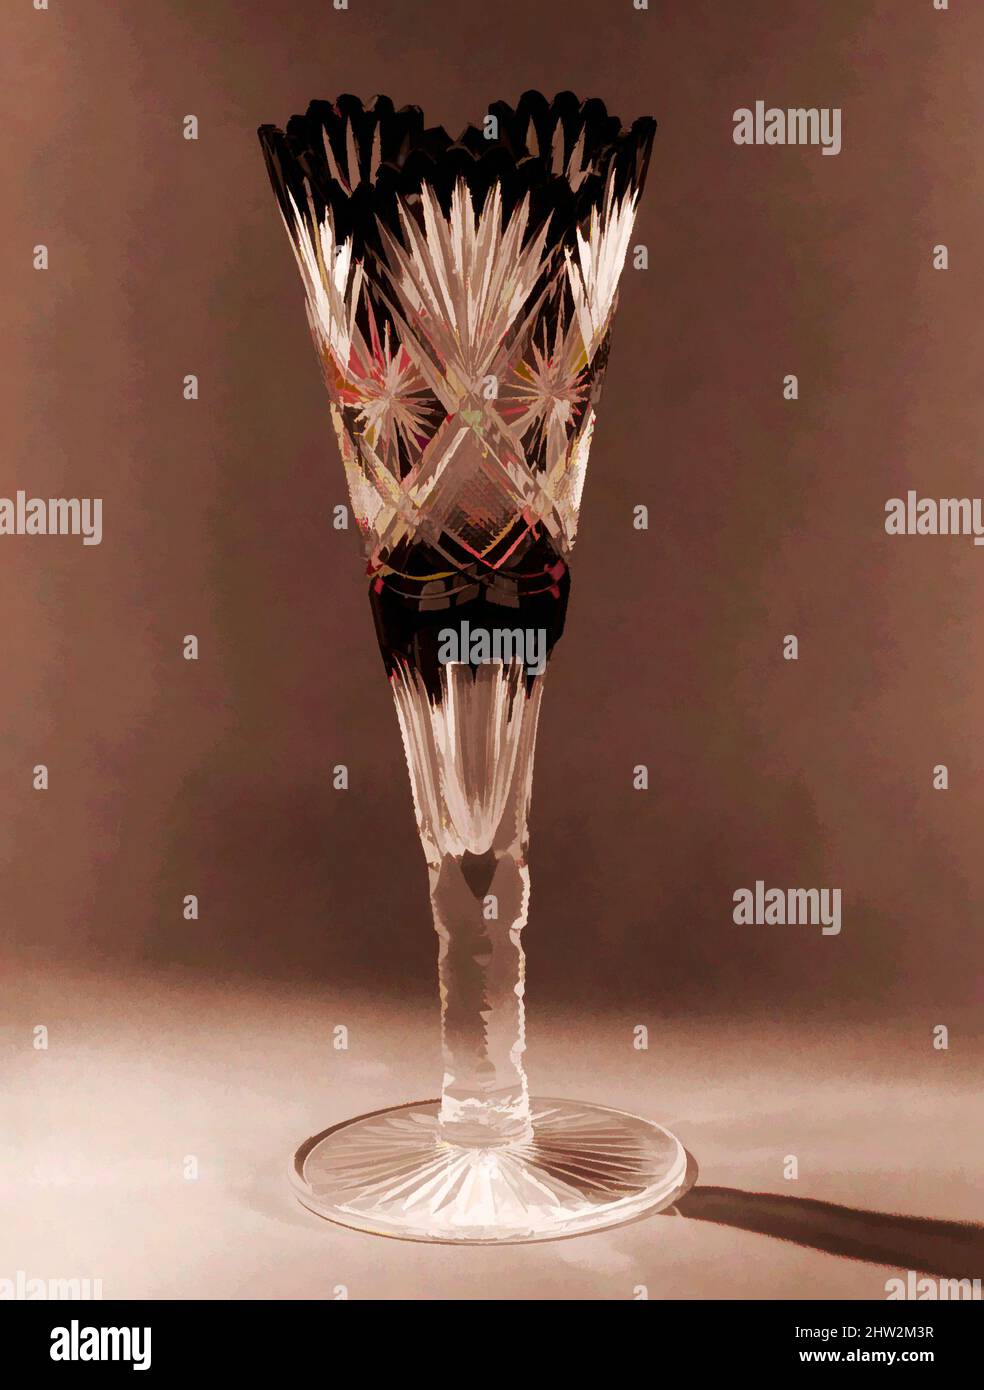 Art inspired by Vase, 1865–1921, Made in White Mills, Pennsylvania, United States, American, Cut blown glass, Glass, Dorflinger Glass Works (1865–1881, Classic works modernized by Artotop with a splash of modernity. Shapes, color and value, eye-catching visual impact on art. Emotions through freedom of artworks in a contemporary way. A timeless message pursuing a wildly creative new direction. Artists turning to the digital medium and creating the Artotop NFT Stock Photo